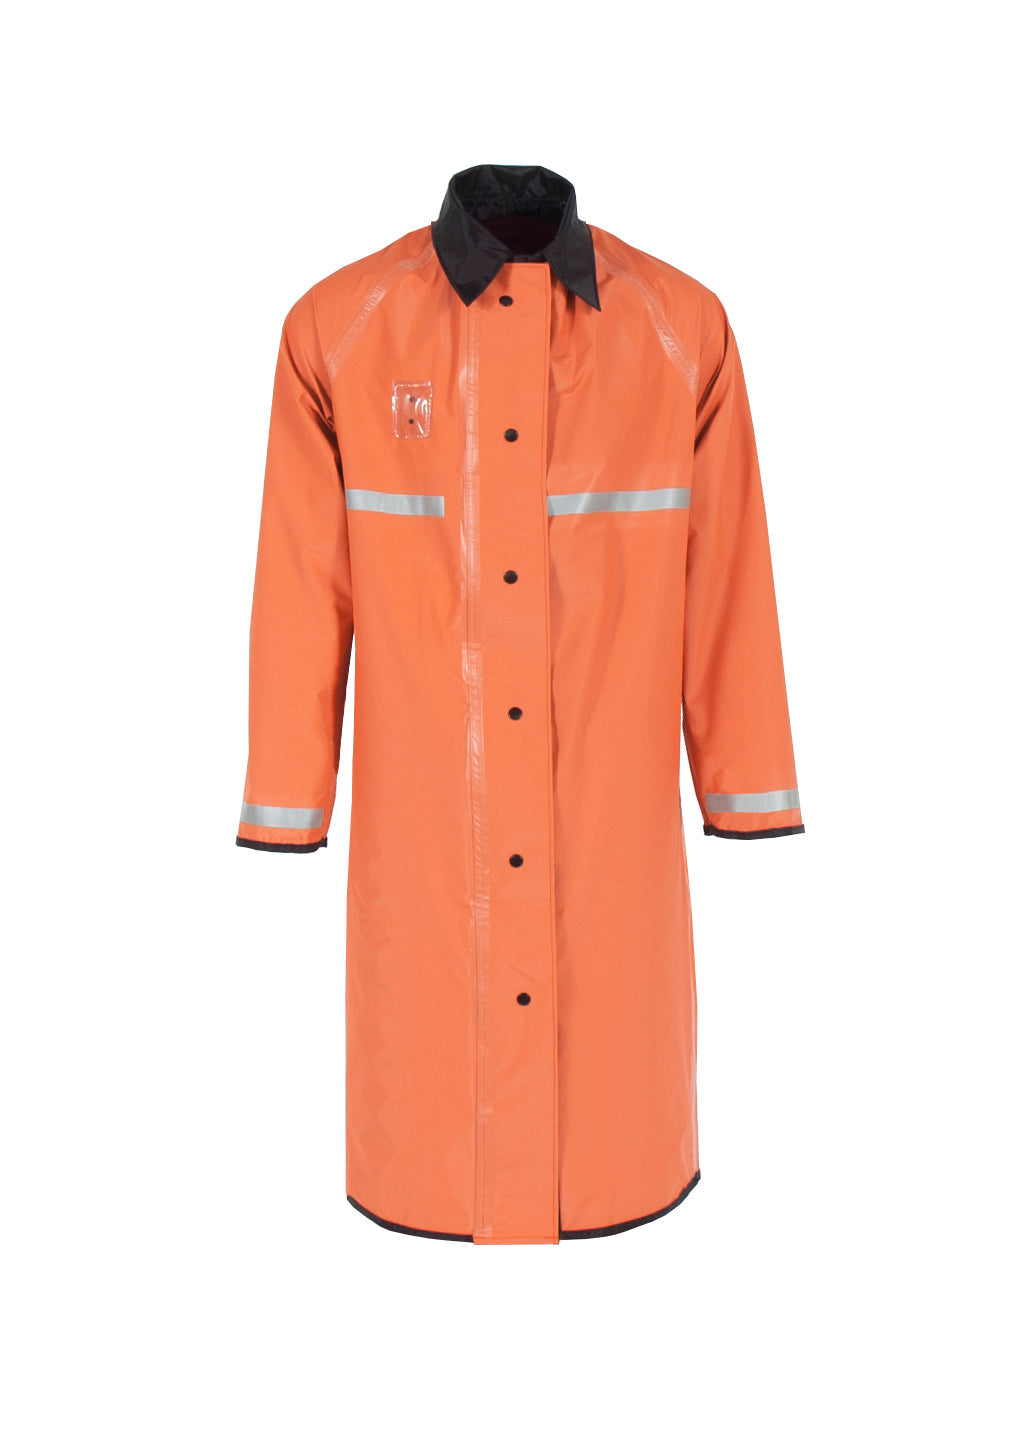 Neese 447RCH3M Reversible Series Coat with 3M Reflective Taping